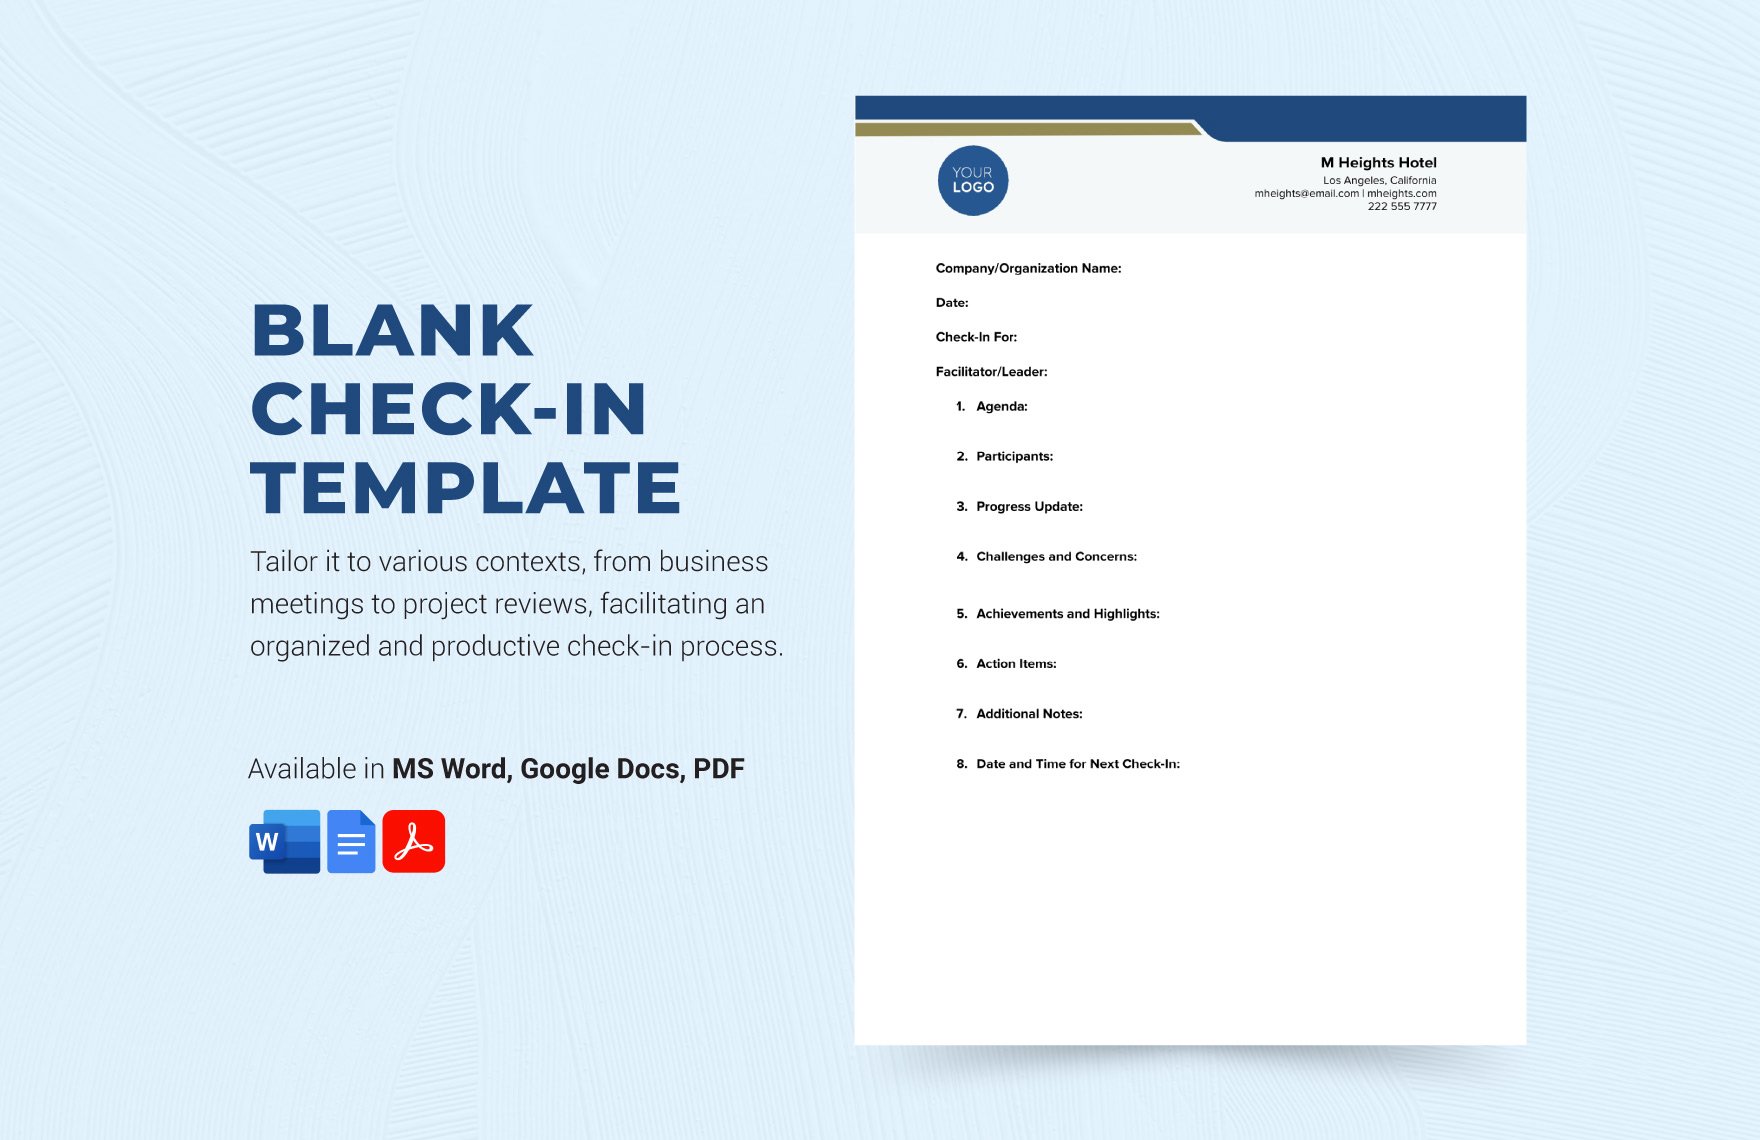 Blank Check-in Template